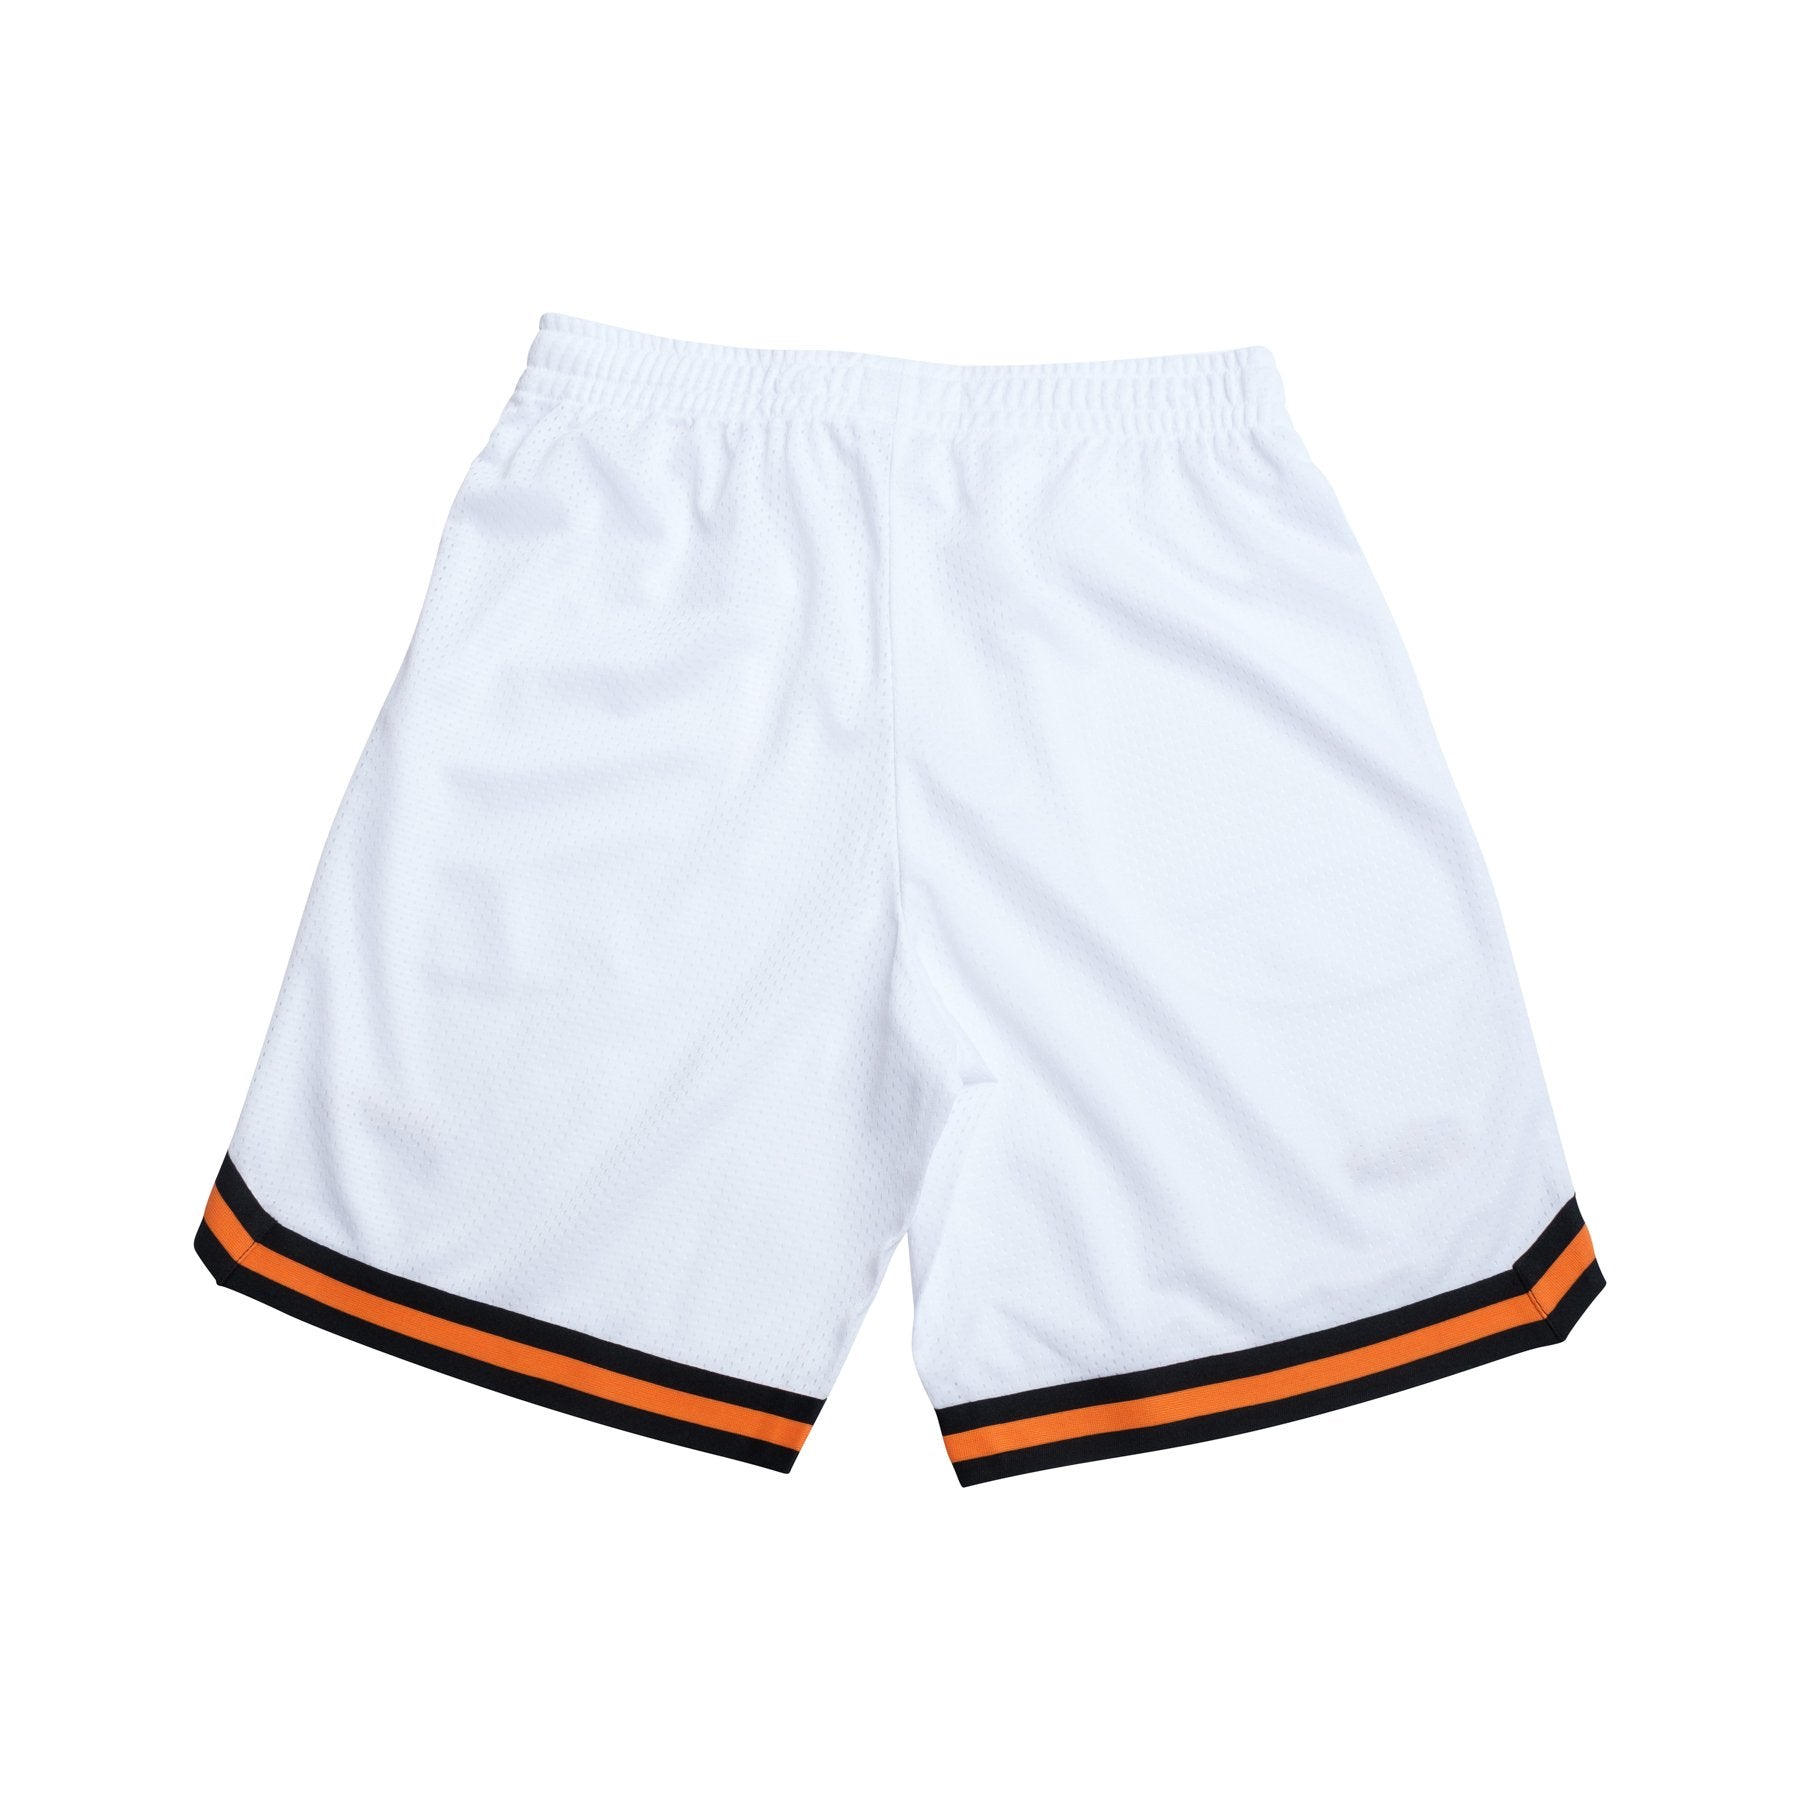 Back view of white shorts with black and orange trim on the bottom